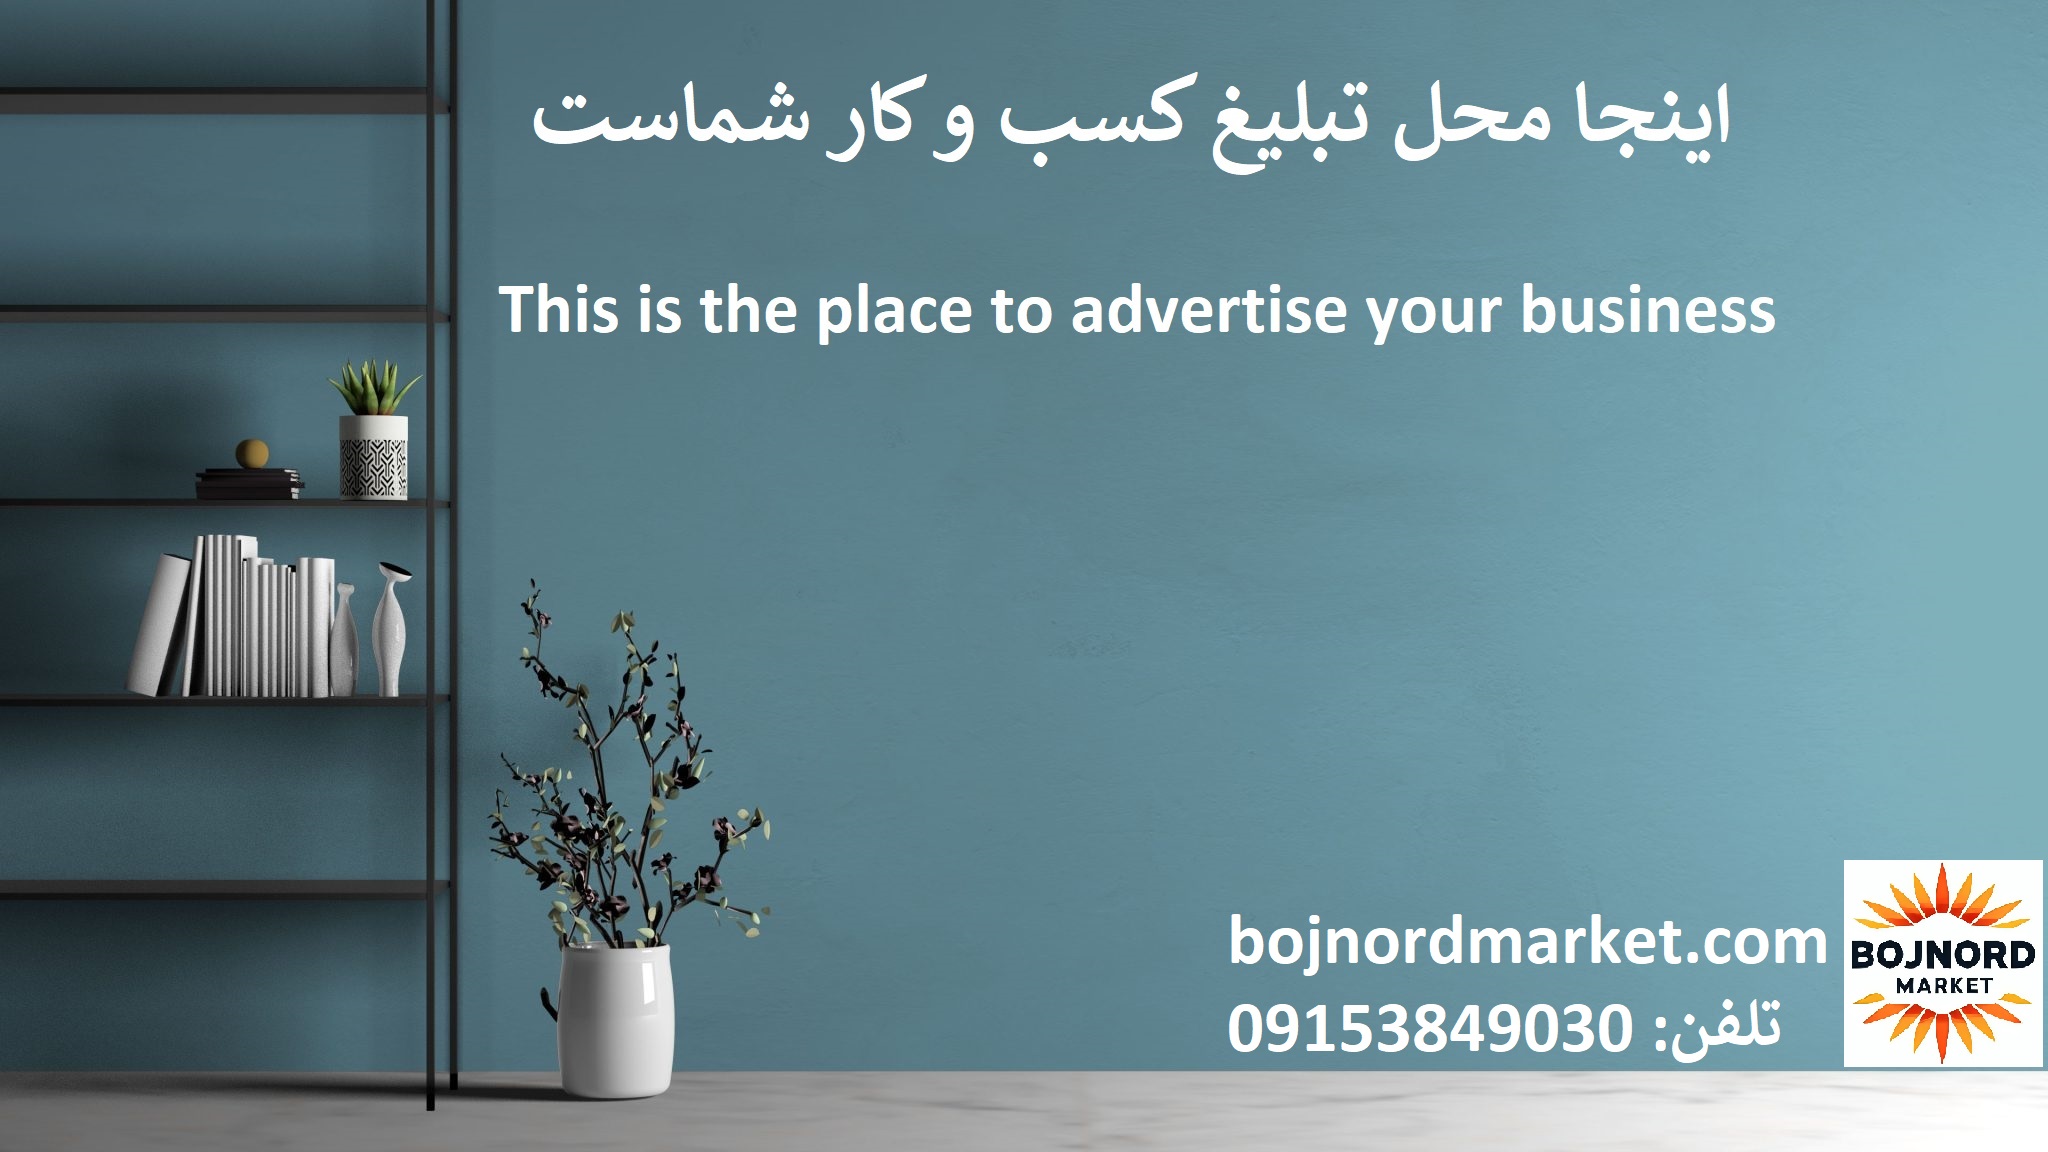 This is the place to advertise your business in bojnordmarket.بجنورد مارکت